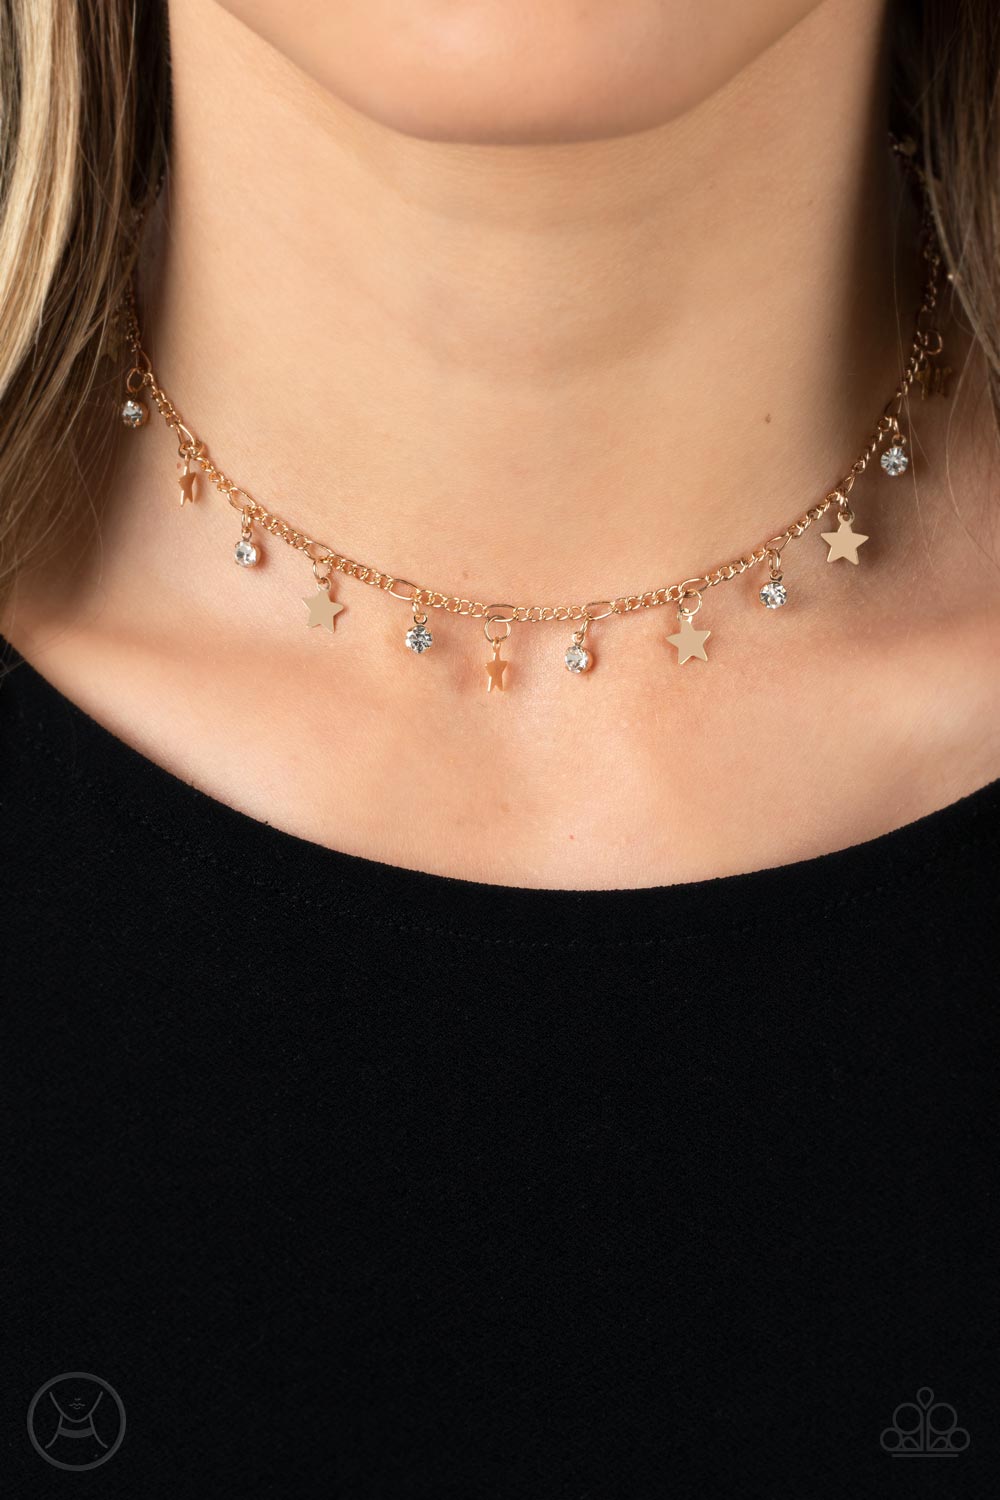 Little Lady Liberty - Gold Star Choker - Paparazzi - Dainty white rhinestones and flat gold stars twinkle along a classic gold chain around the neck, resulting in a stellar fringe.